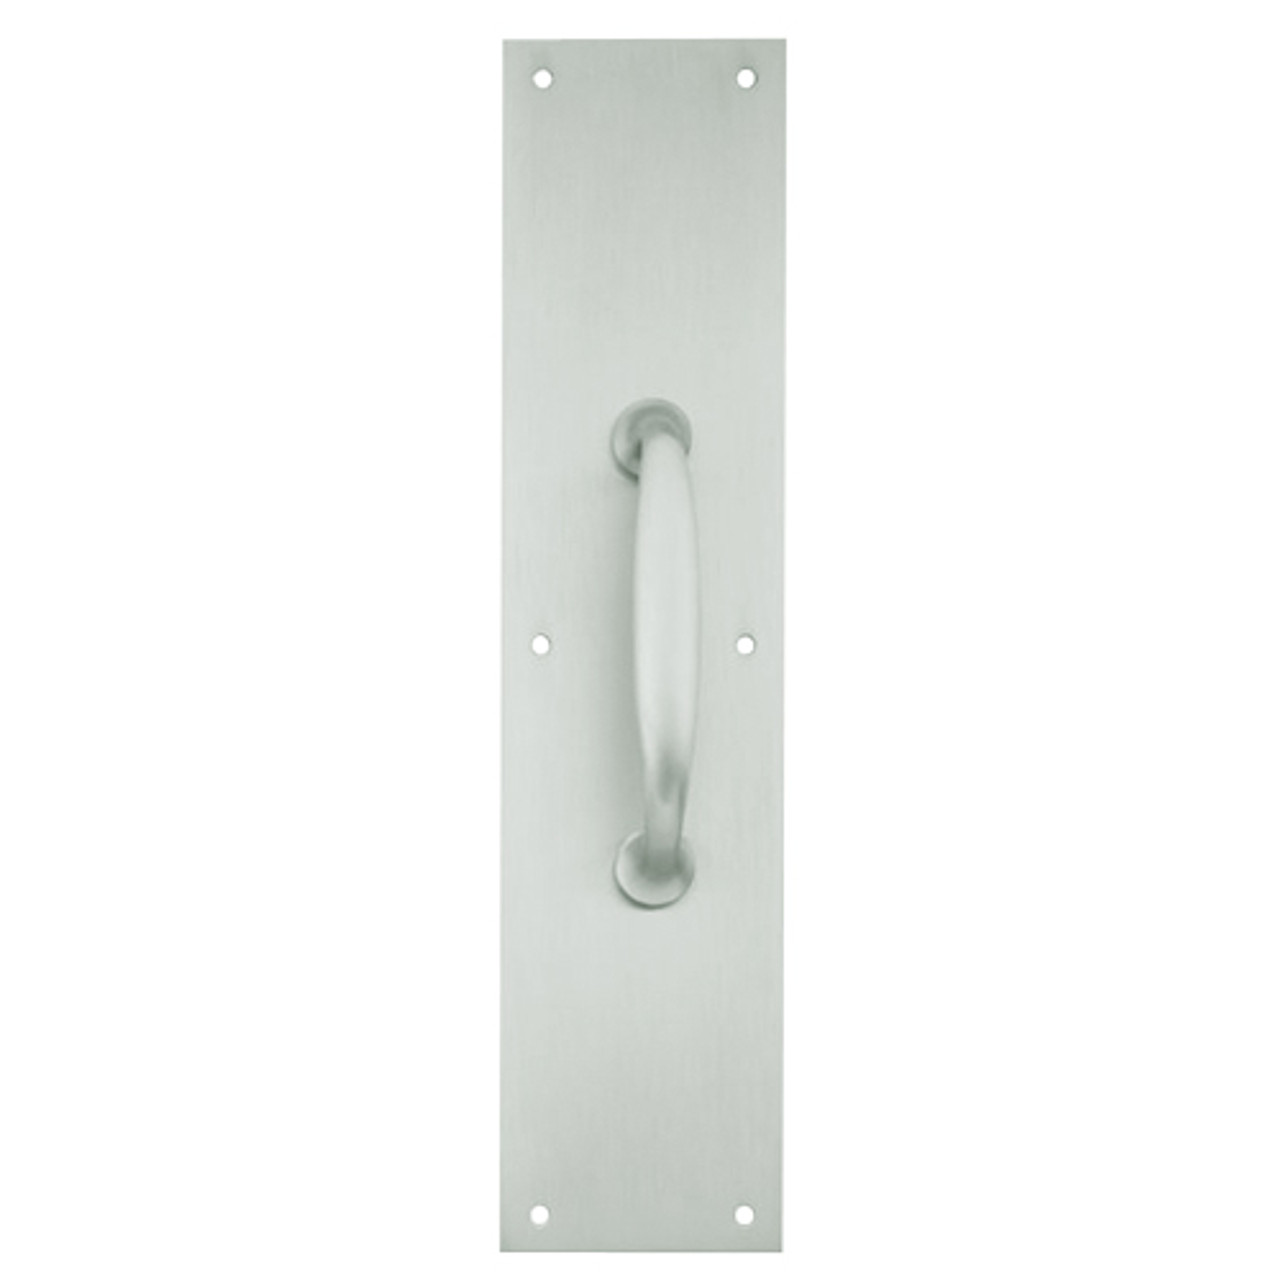 8311-5-US15-3-5x15 IVES Architectural Door Trim 3.5x15 Inch Pull Plate in Satin Nickel